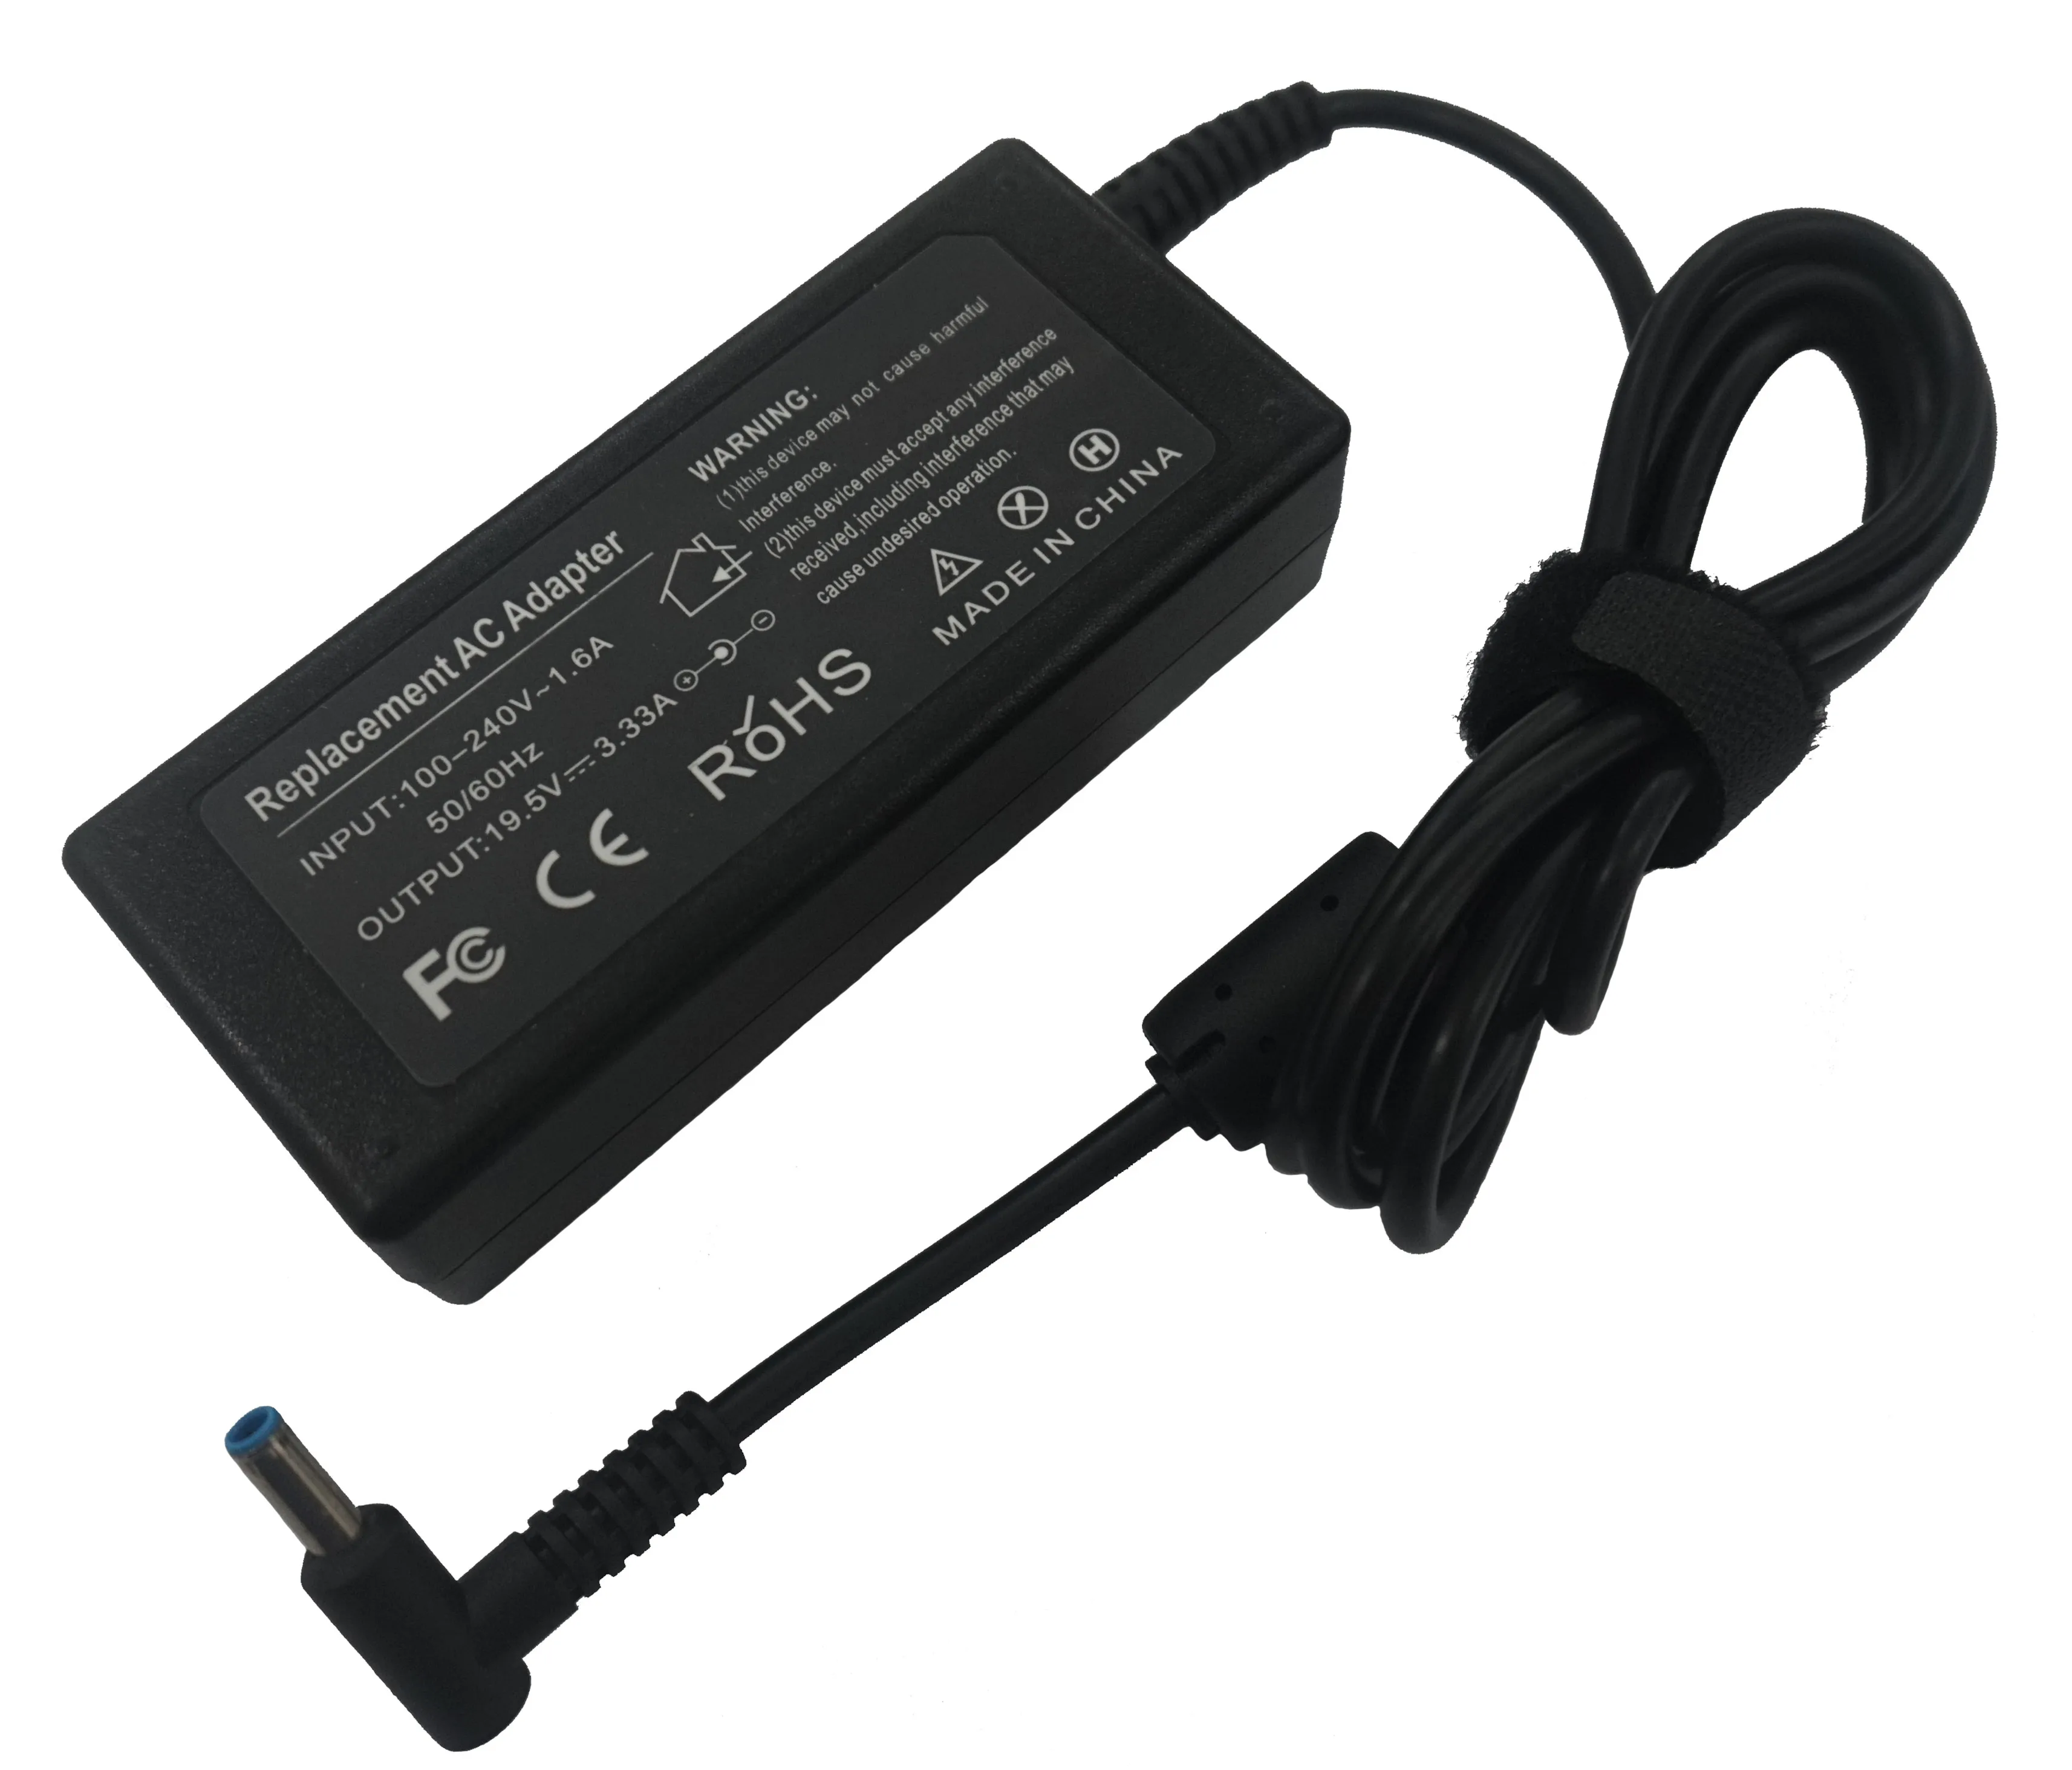 

for hp laptop charger adapter 19.5v 3.33a 65w replacement ac power adapter charger Chromebook 14 Pavilion 15 laptop charger, N/a